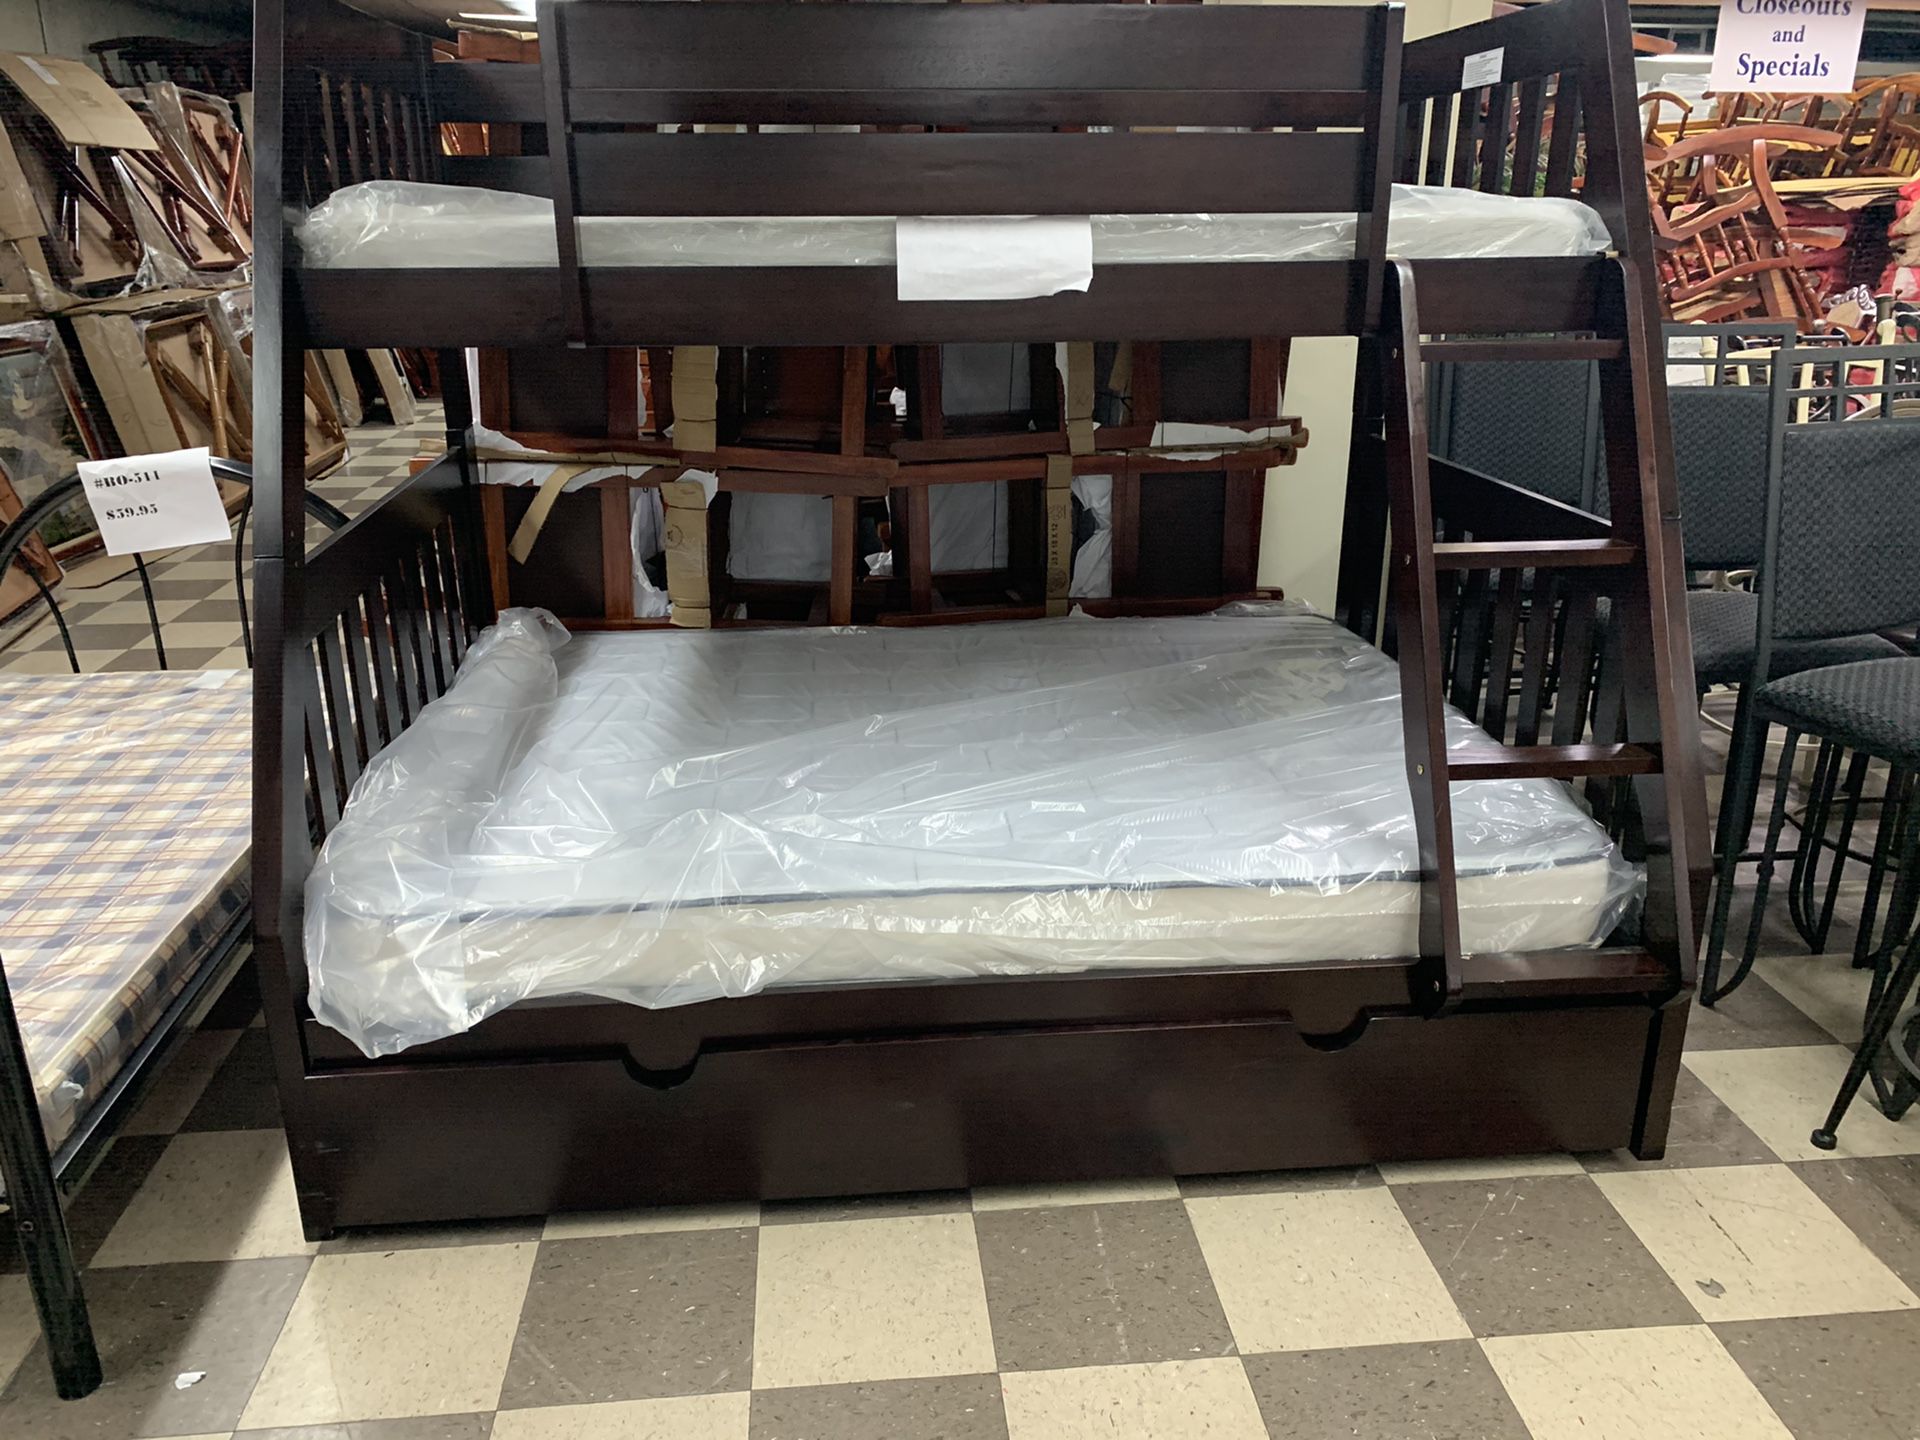 NEW FULL OVER TWIN BUNK BED WITH TRUNDLE BED AND ALL MATTRESS INCLUDED NEW